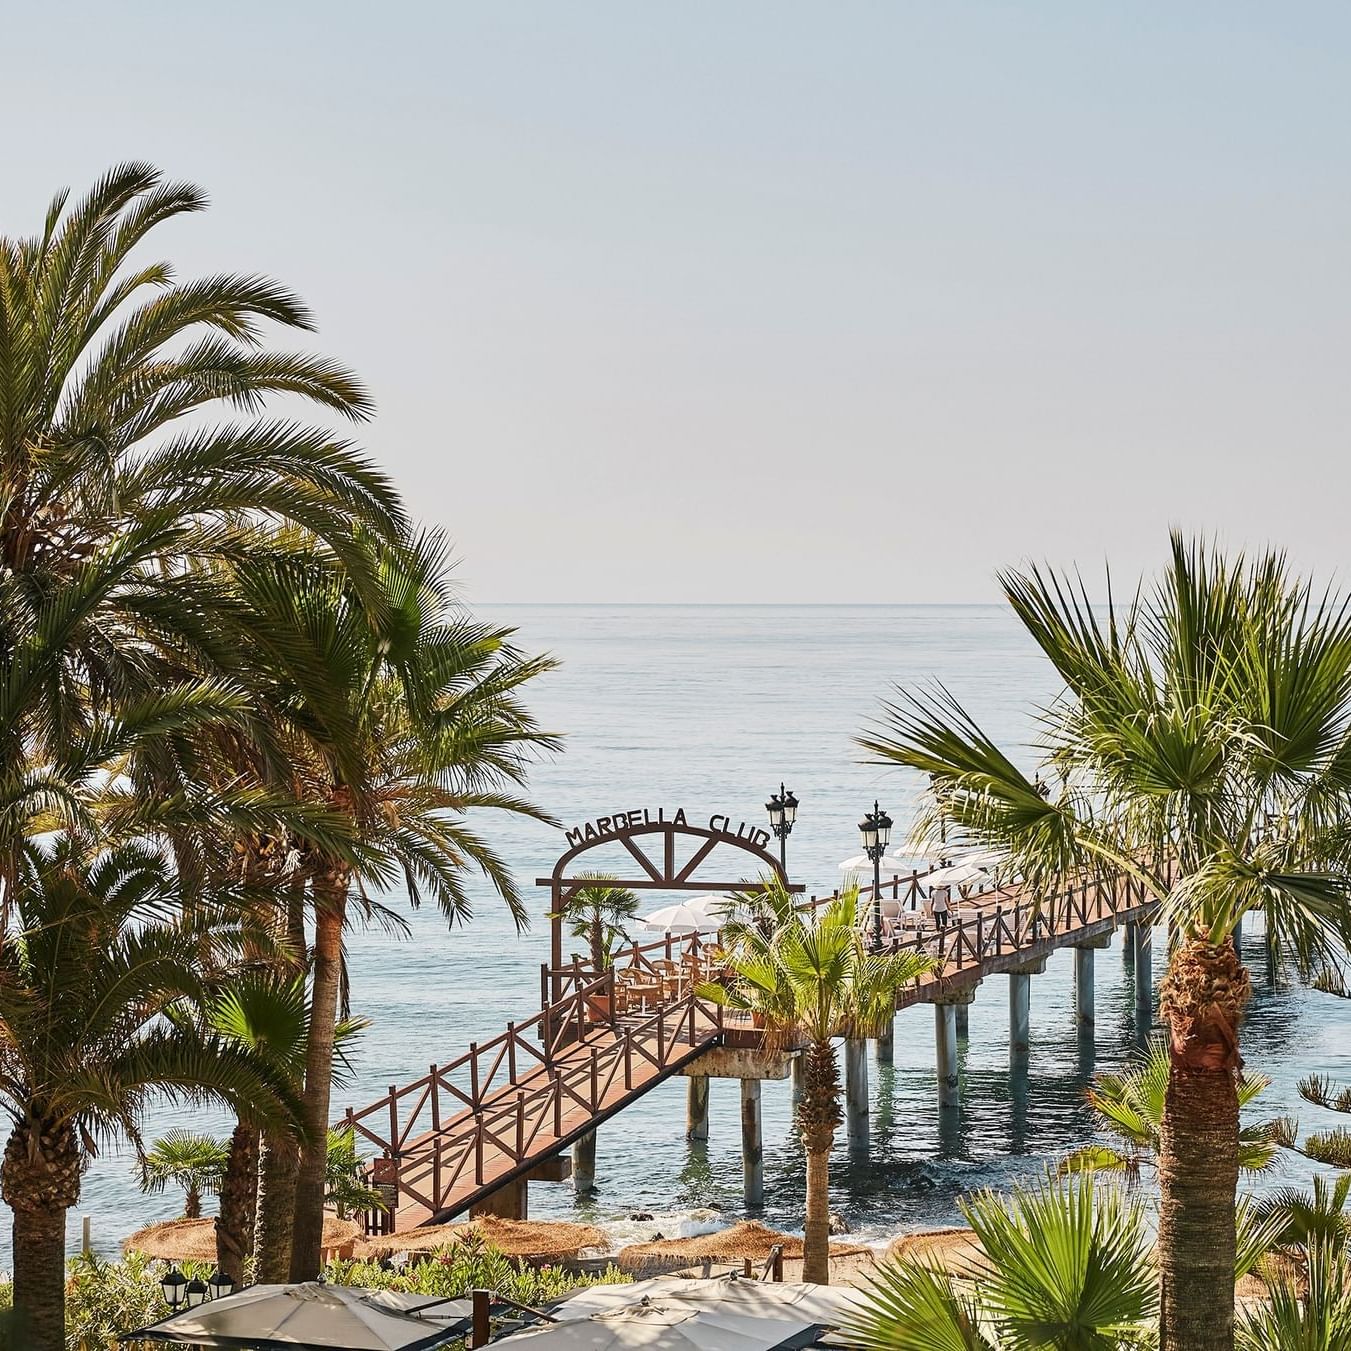 Long shot of a pier in the ocean at Marbella Club Hotel